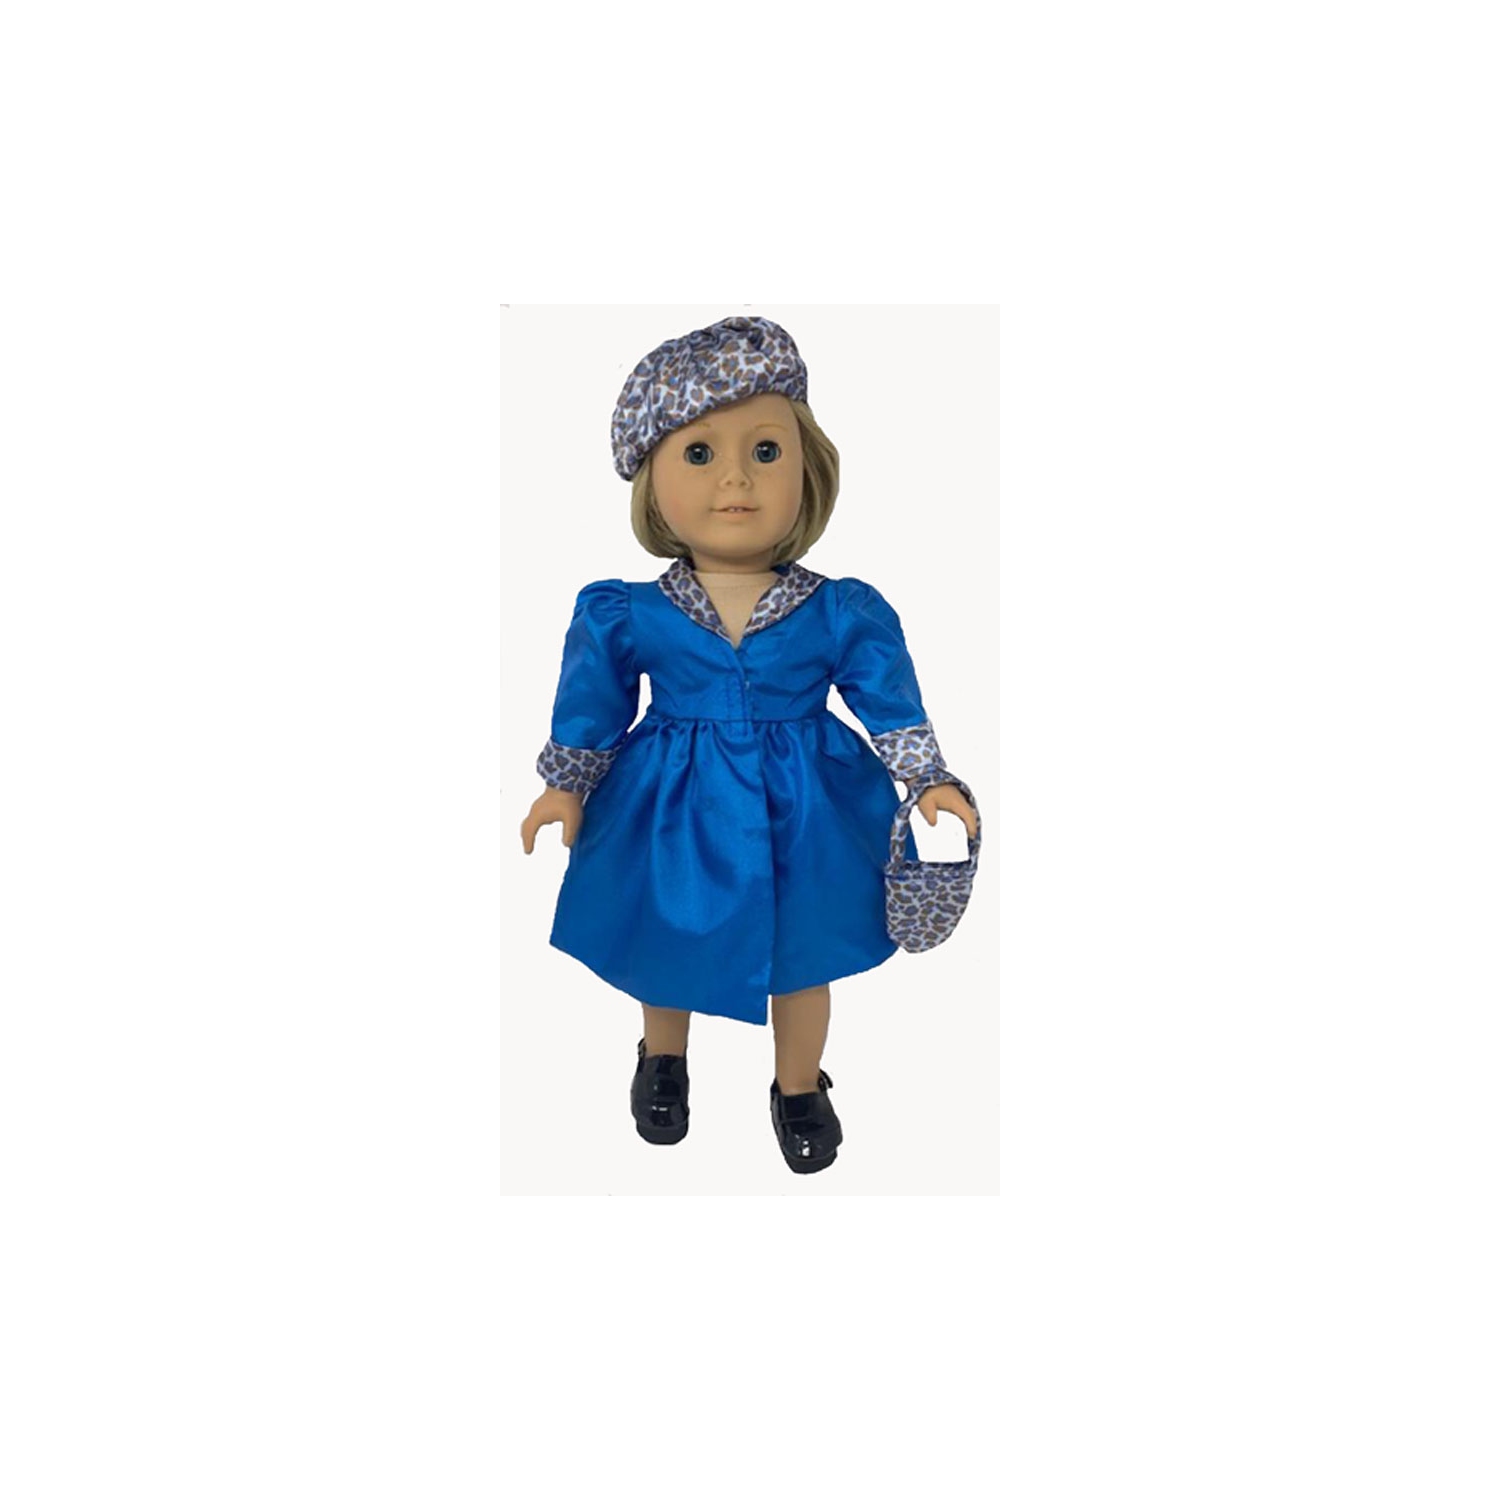 Doll Clothes Superstore Going Shopping Outfit For 18 Inch Dolls Like Our Generation, American Girl, My Life Dolls